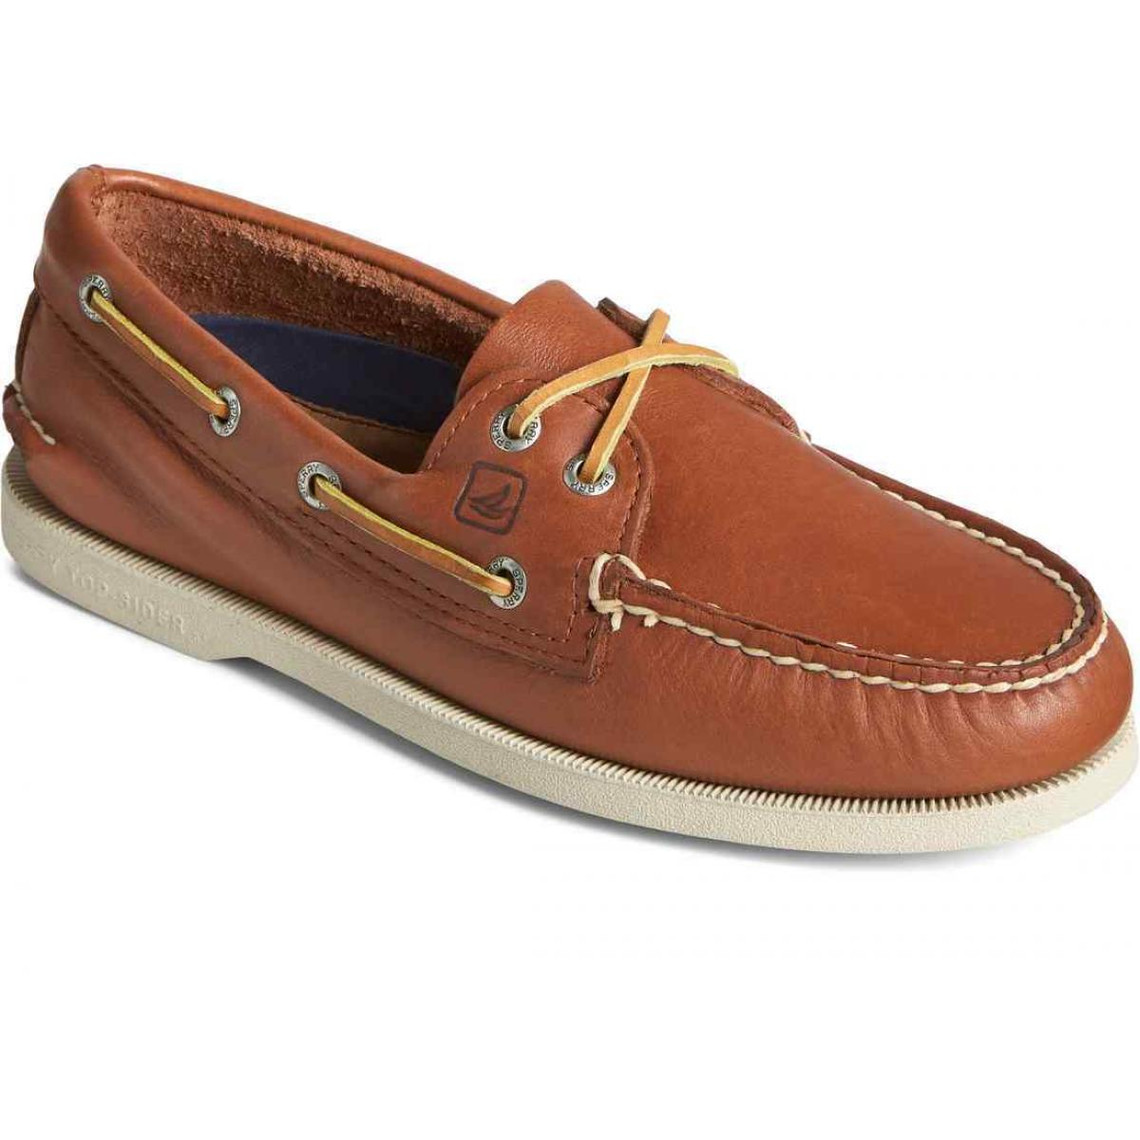 Sperry A/O 2 Eye Chaussures Bateau Homme,